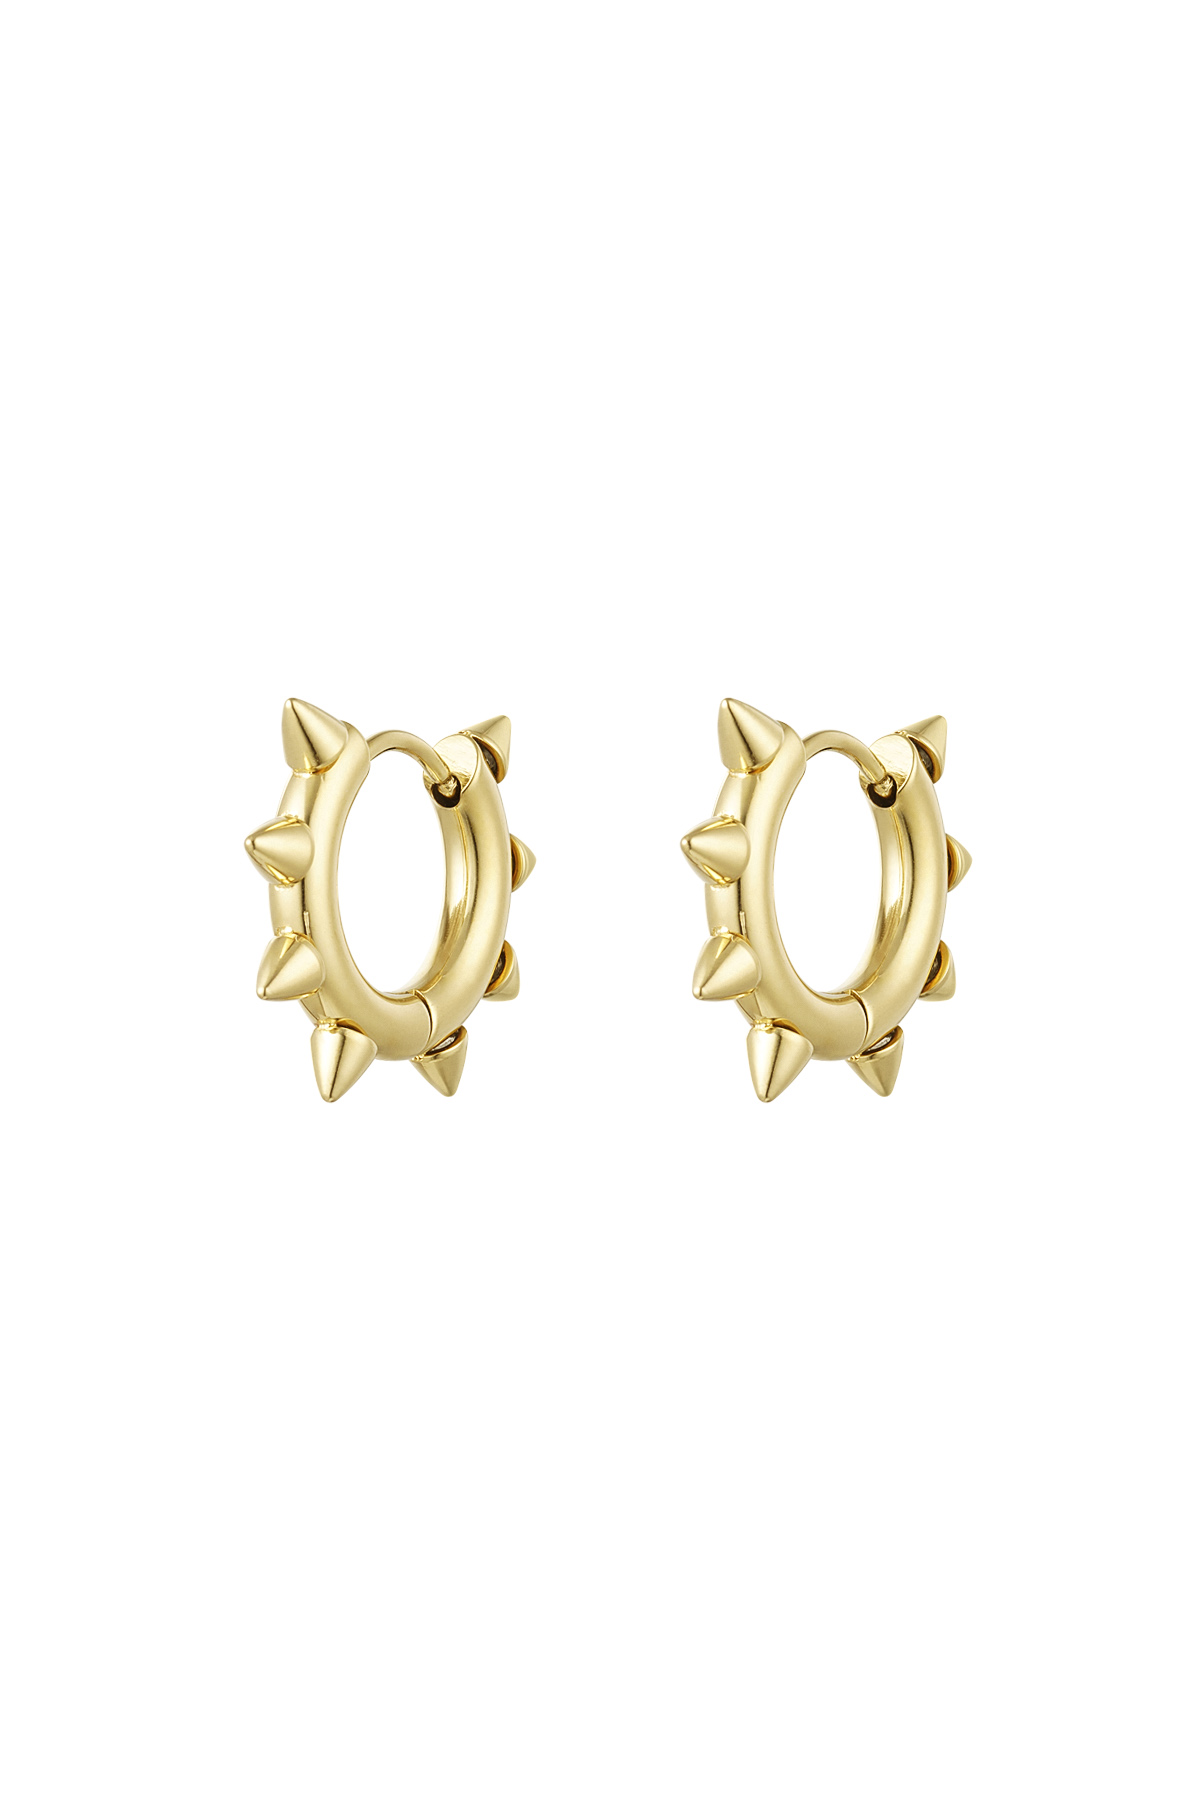 Earrings round spikes small - gold Stainless Steel h5 